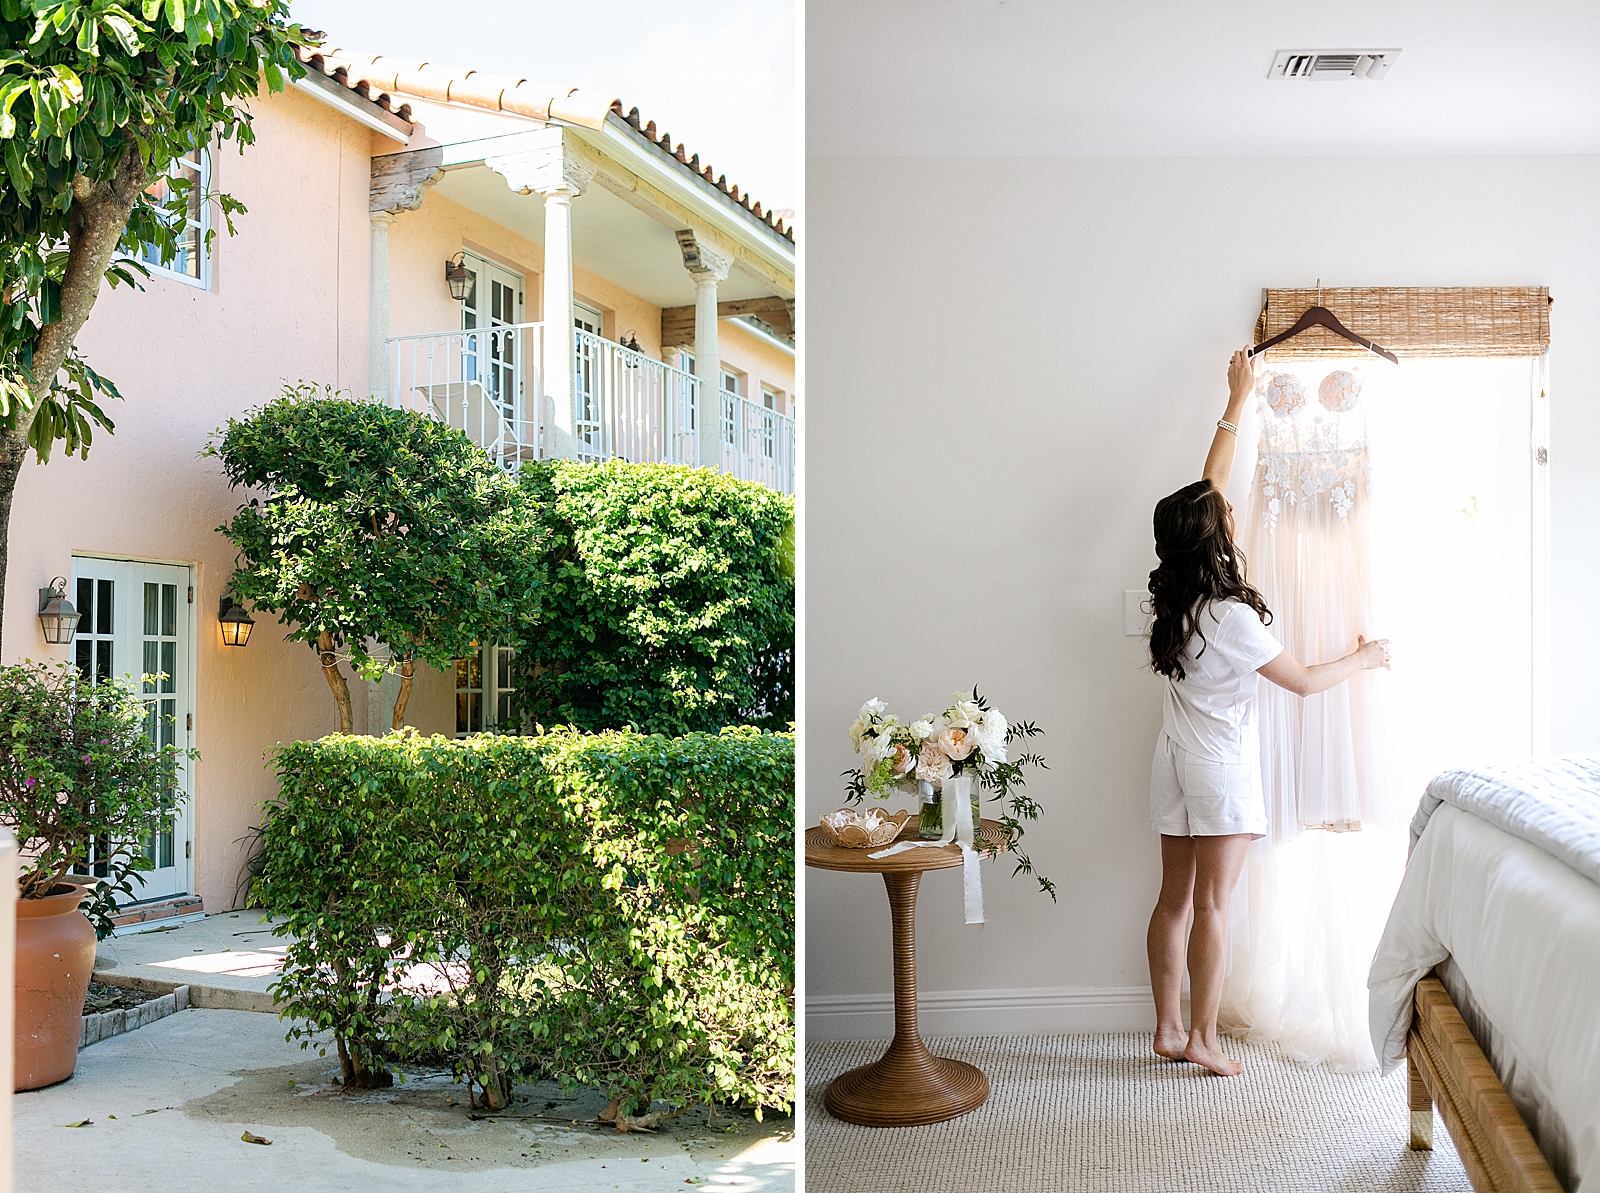 Detail shot of outdoor courtyard and Bride looking at wedding dress hanging by the window